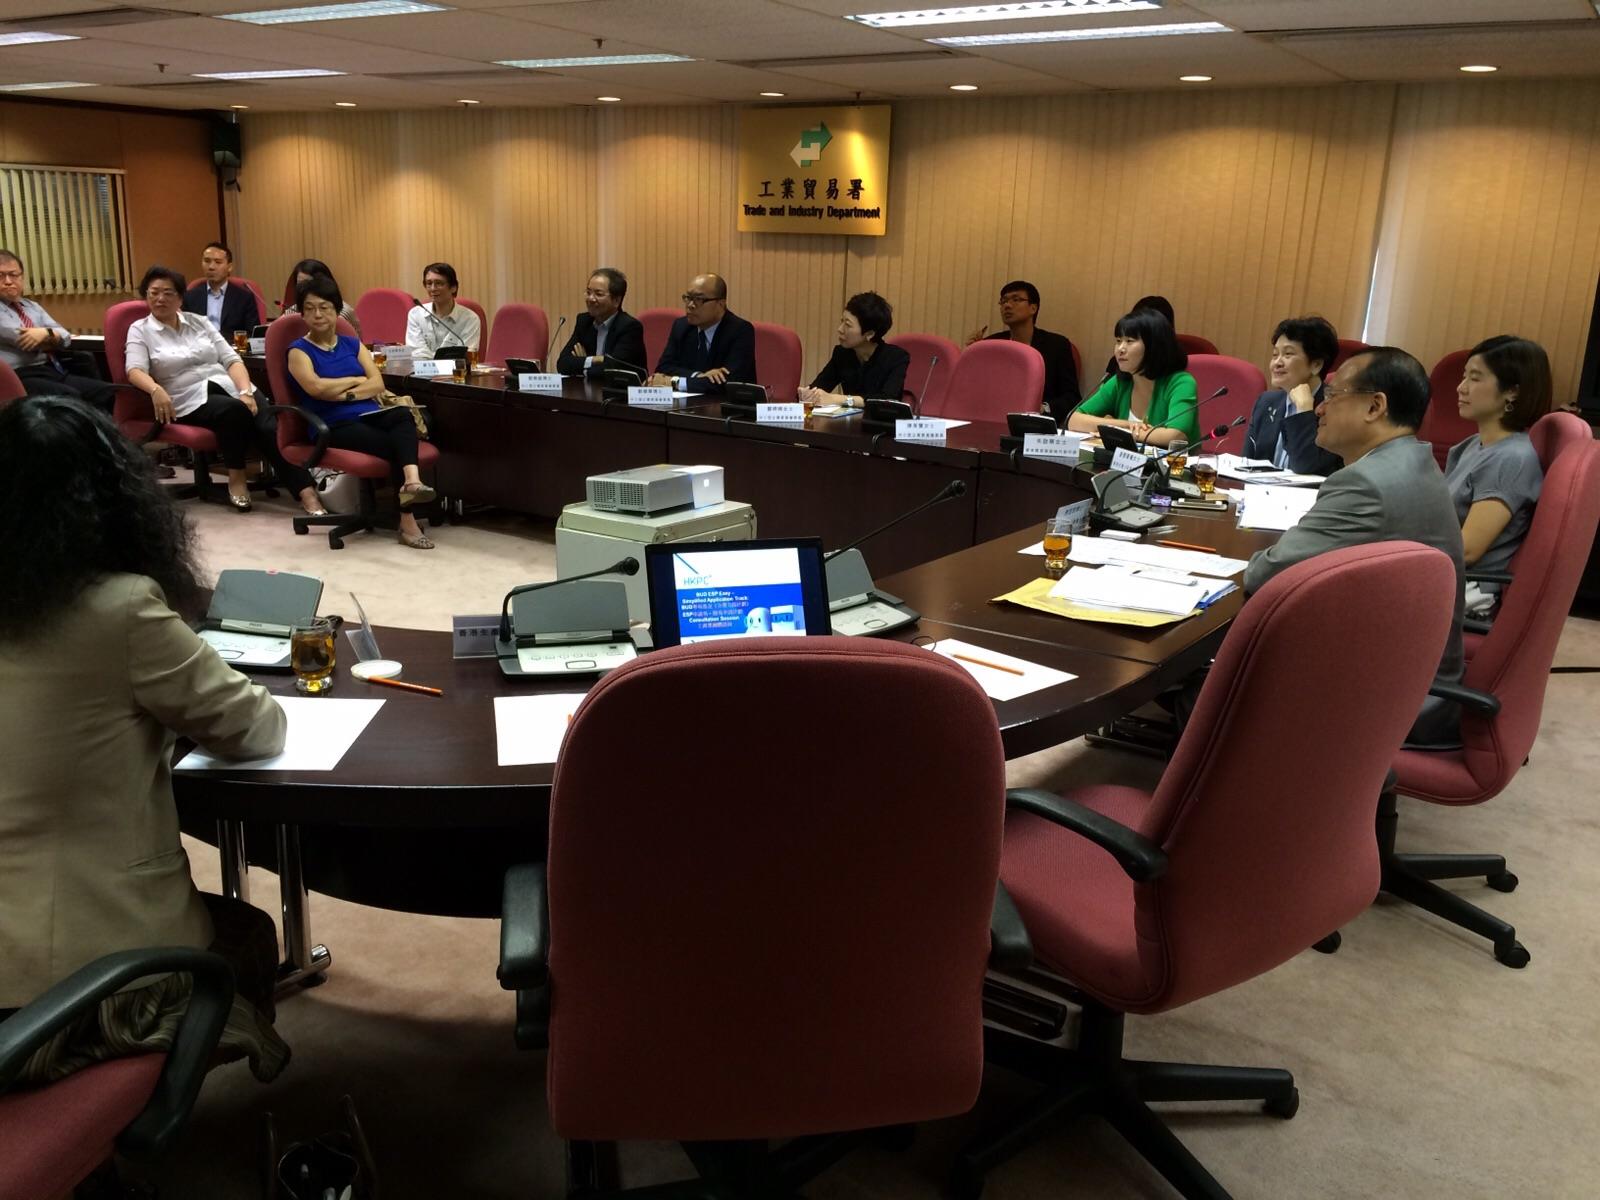 Photo 12 : The Small and Medium Enterprises Committee met with local SME organisations on 16 July 2015 to exchange views on the support required by Hong Kong SMEs in developing e-Commerce and applications of Information Technology. A written summary (Chinese only) on the discussion was then passed to respective Government Bureaux/ Departments for reference.